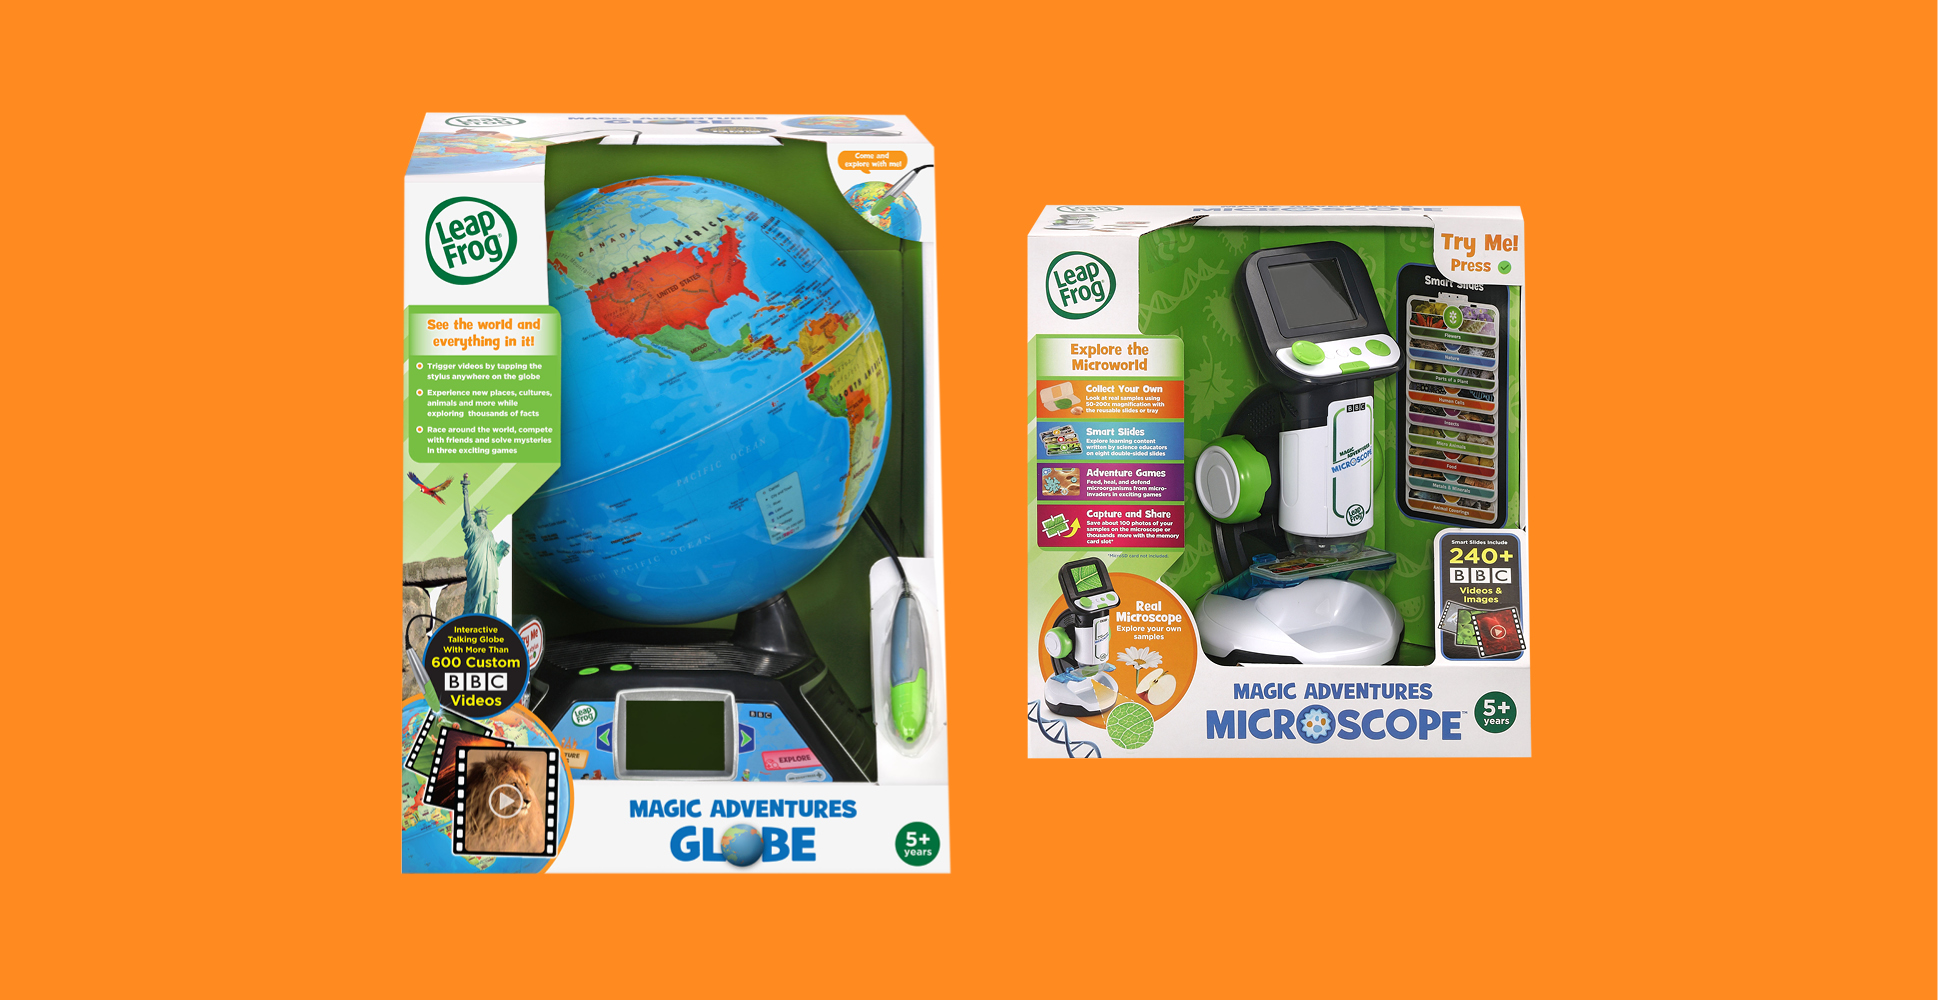 LeapFrog Magic Adventure Prize Pack Giveaway – K-Zone